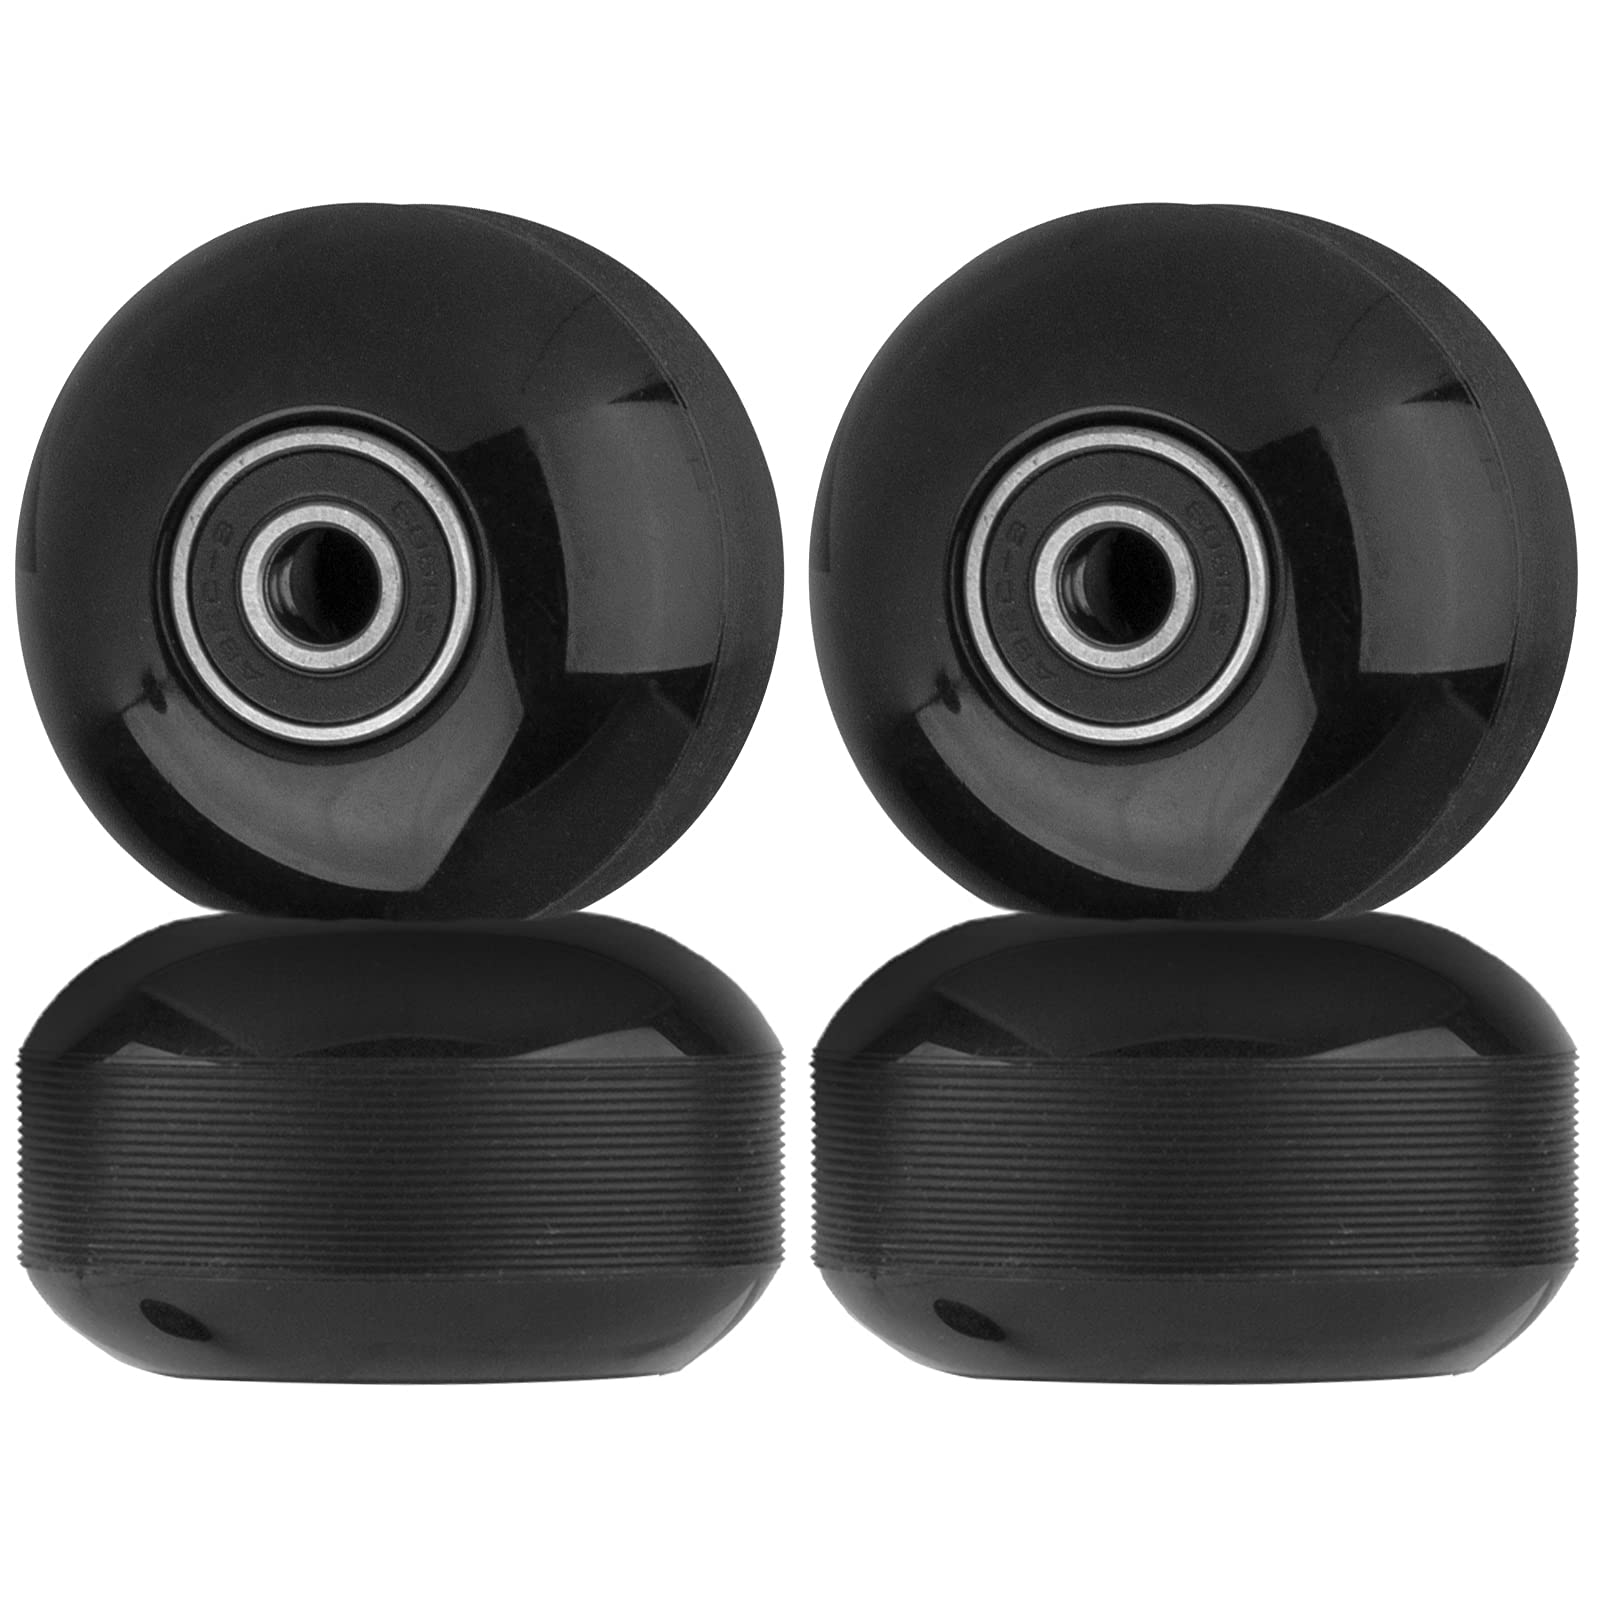 SPORTYOUTH Skateboard Wheels 52mm and Bearings Spacers Set, 95A